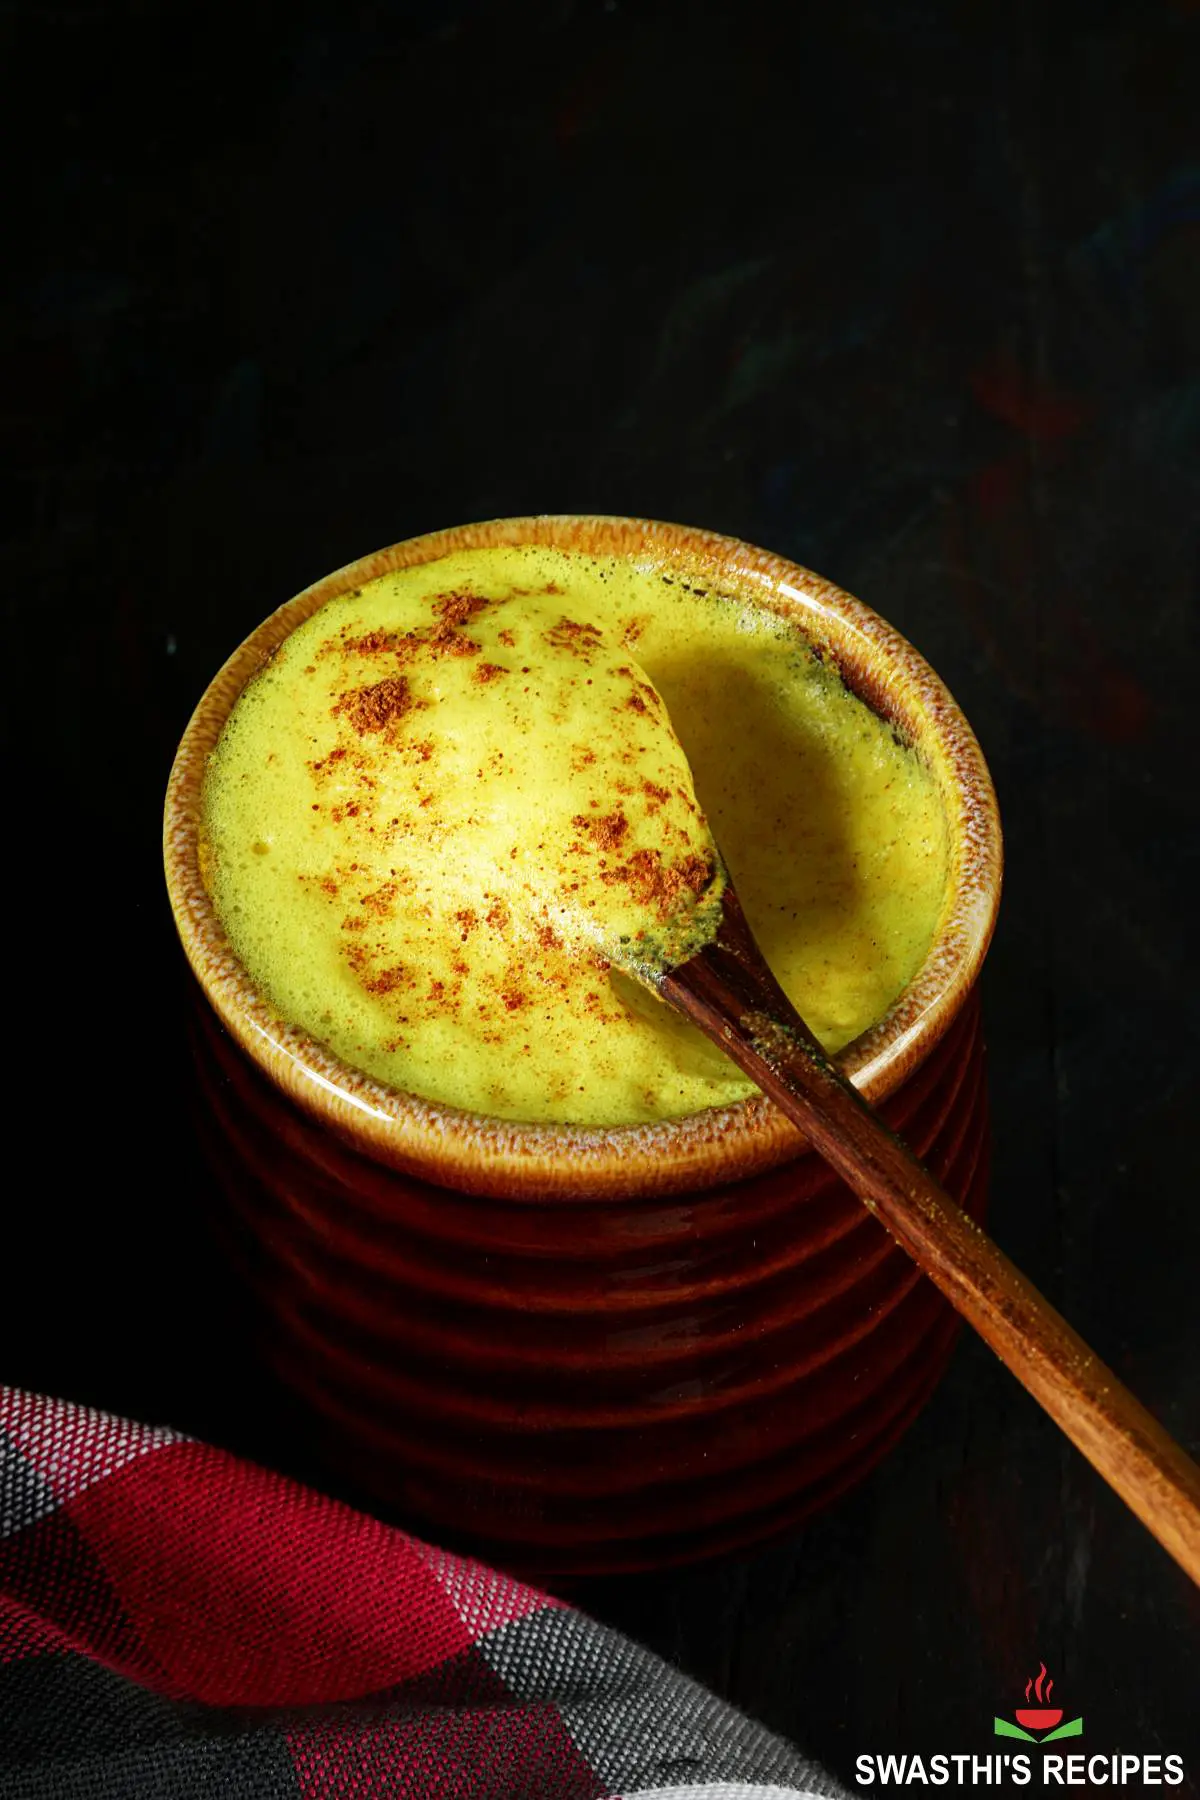 Turmeric latte with froth